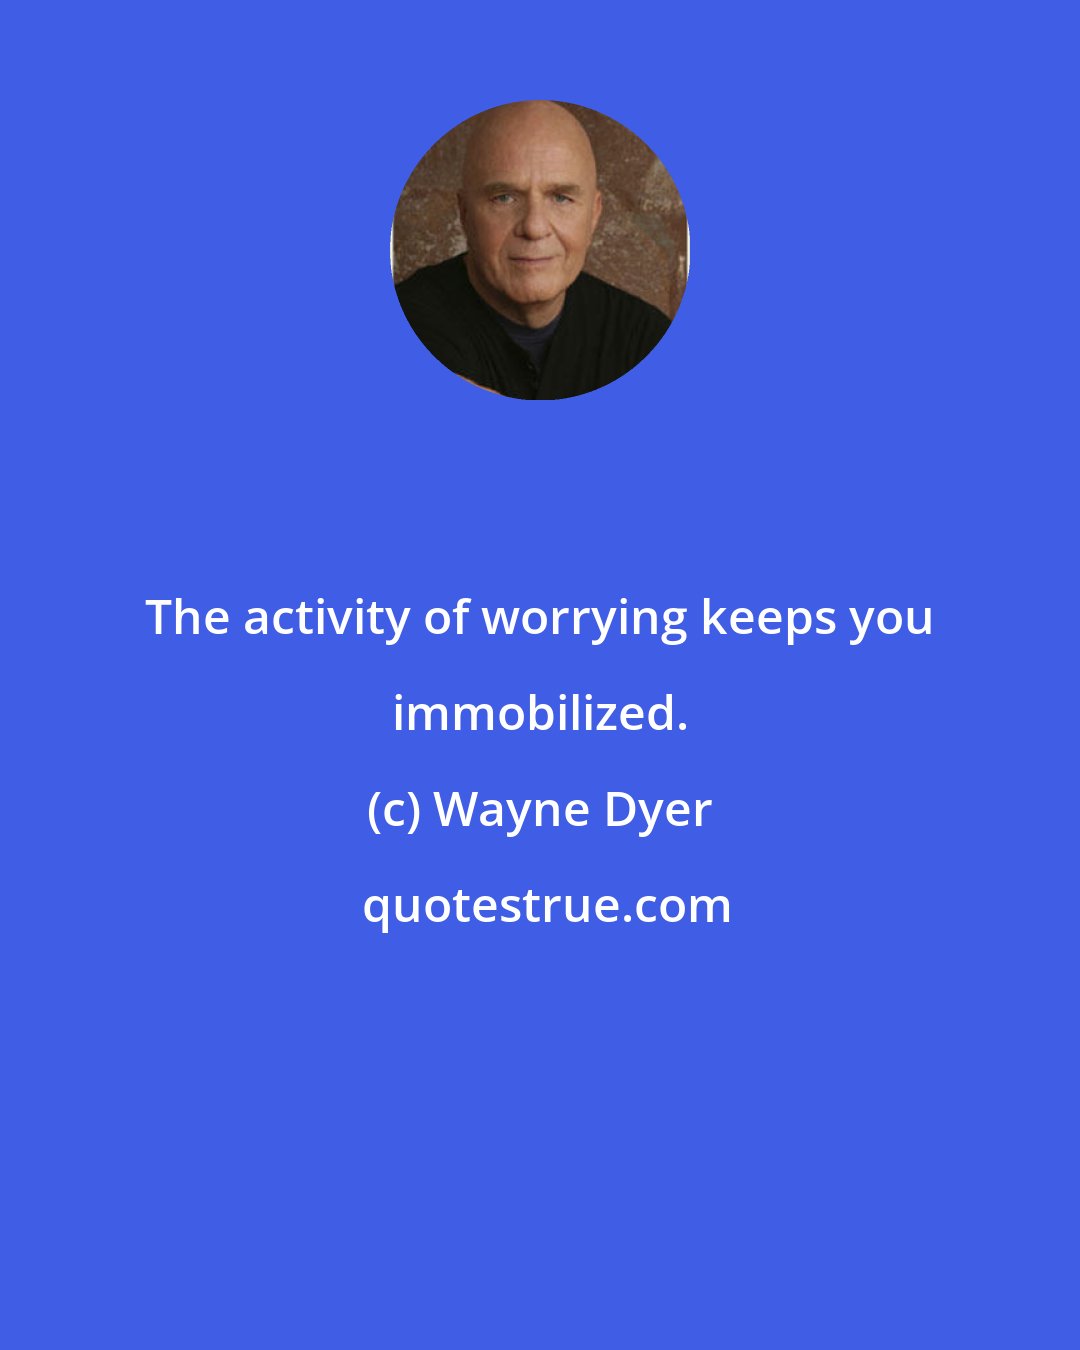 Wayne Dyer: The activity of worrying keeps you immobilized.